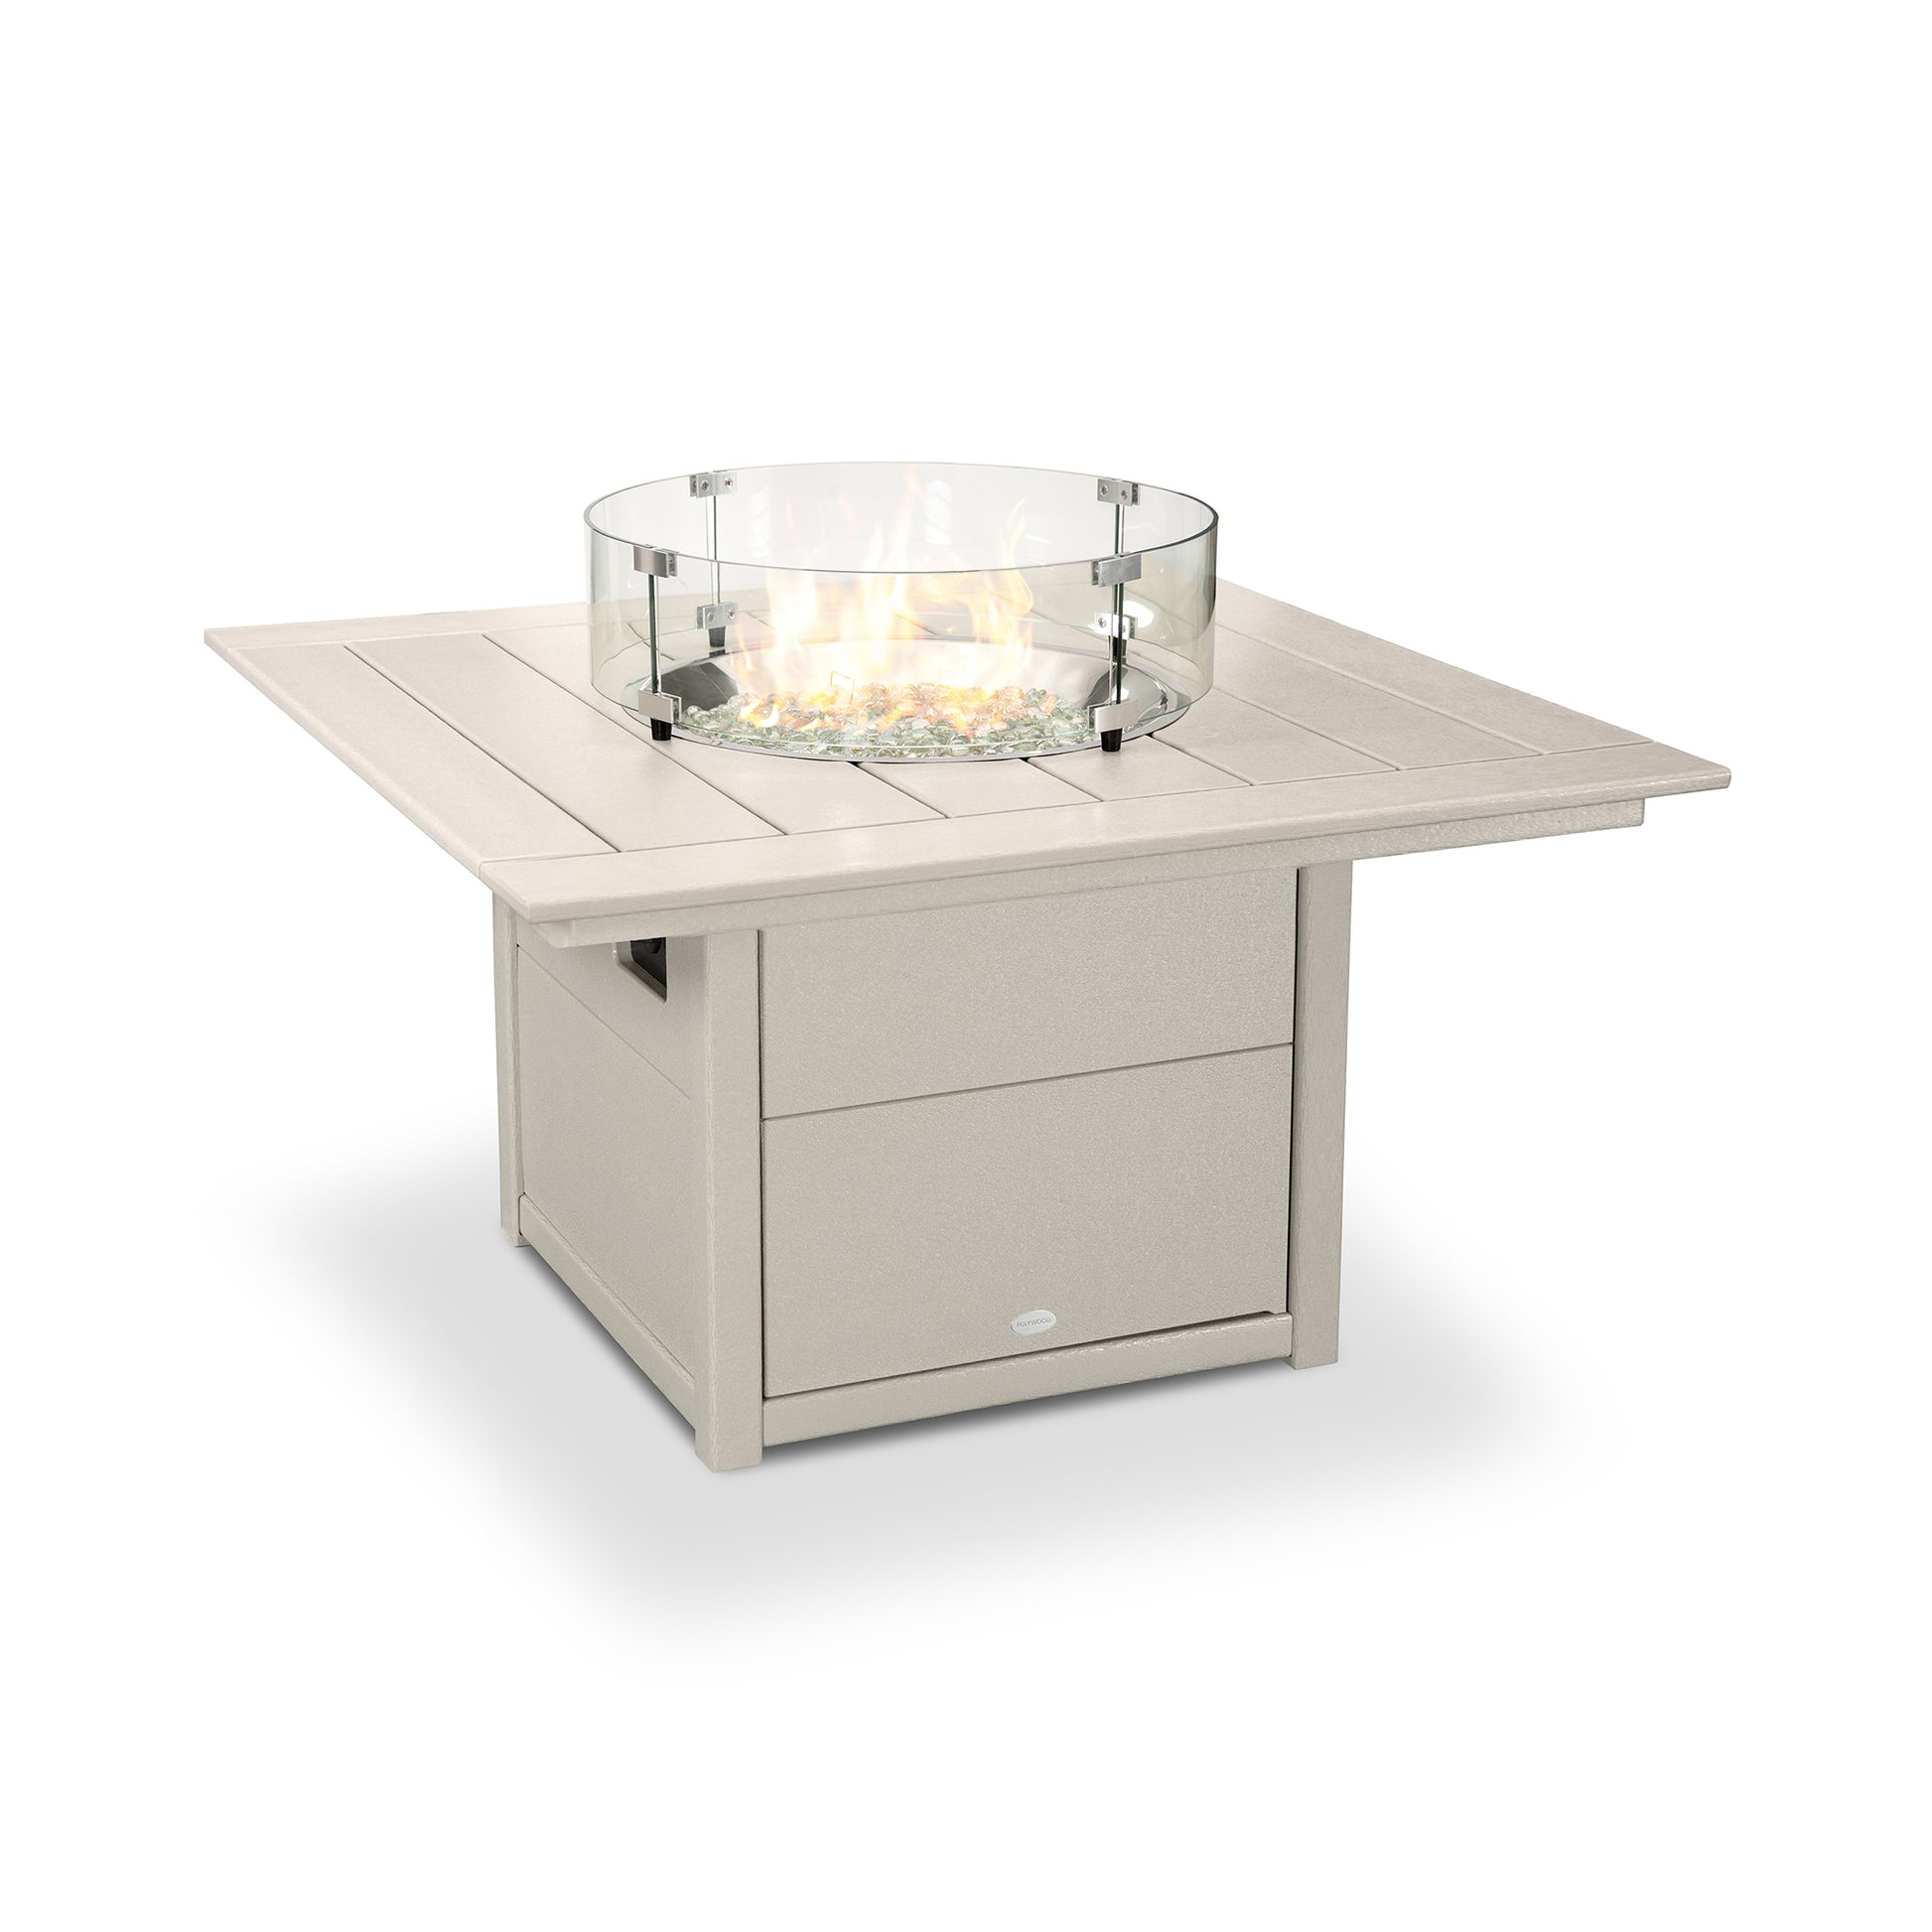 A square POLYWOOD Square 42" Fire Pit Table, featuring a beige metal body and a central glass wind guard surrounding the flame area, placed on a plain white background.